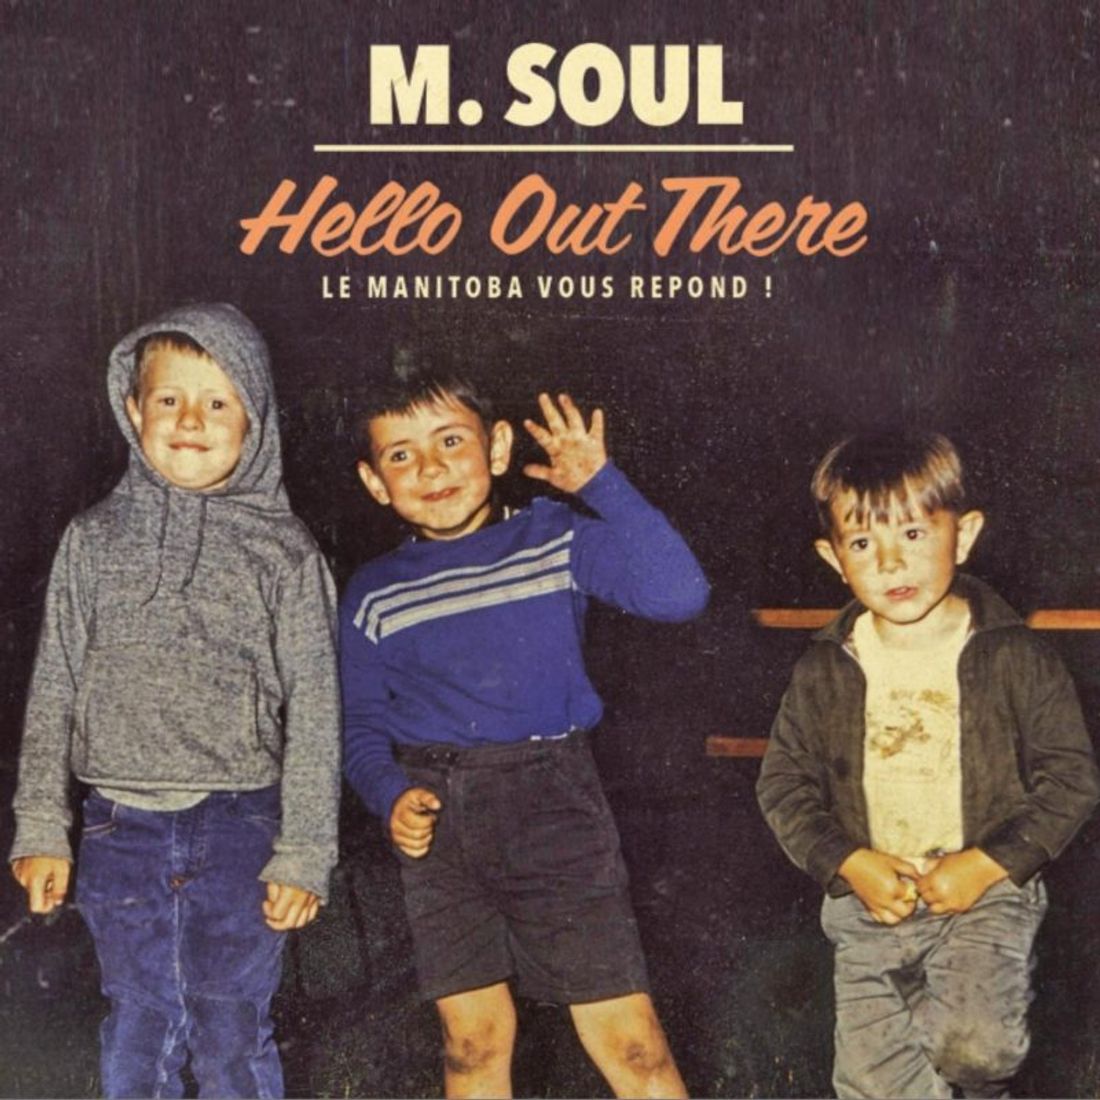 M. SOUL - HELLO OUT THERE - CONCERT